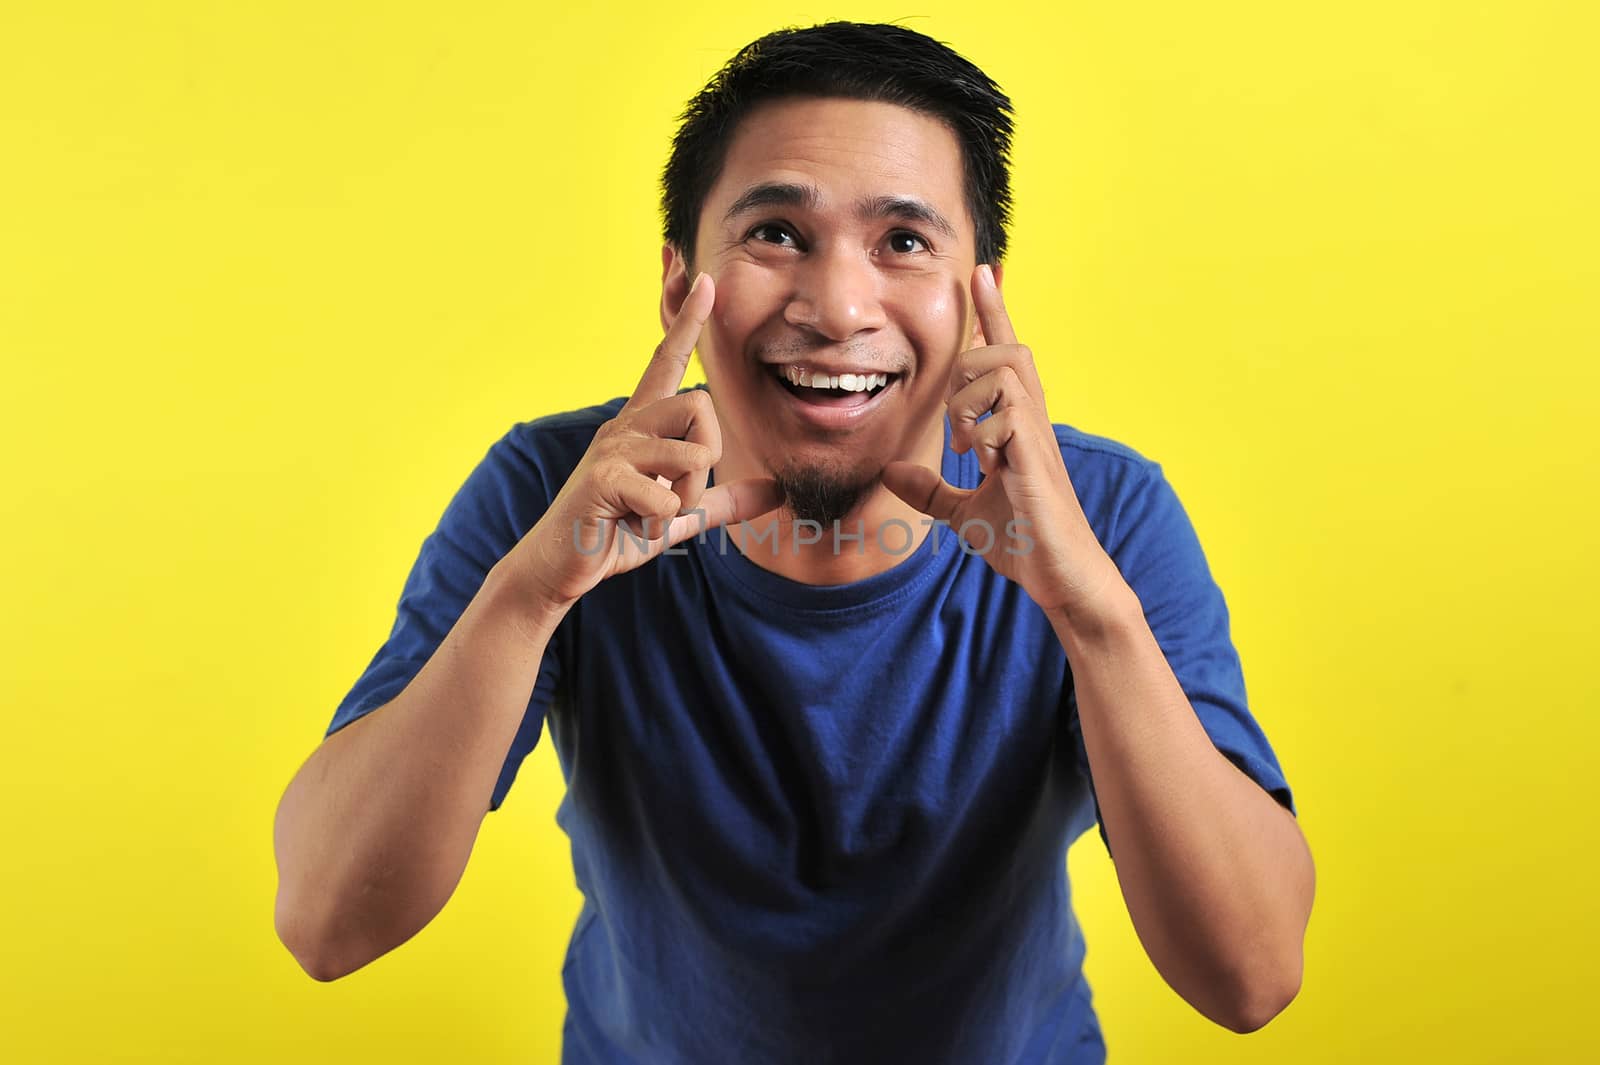 Close up portrait of young man yelling with open mouth, isolated on yellow background